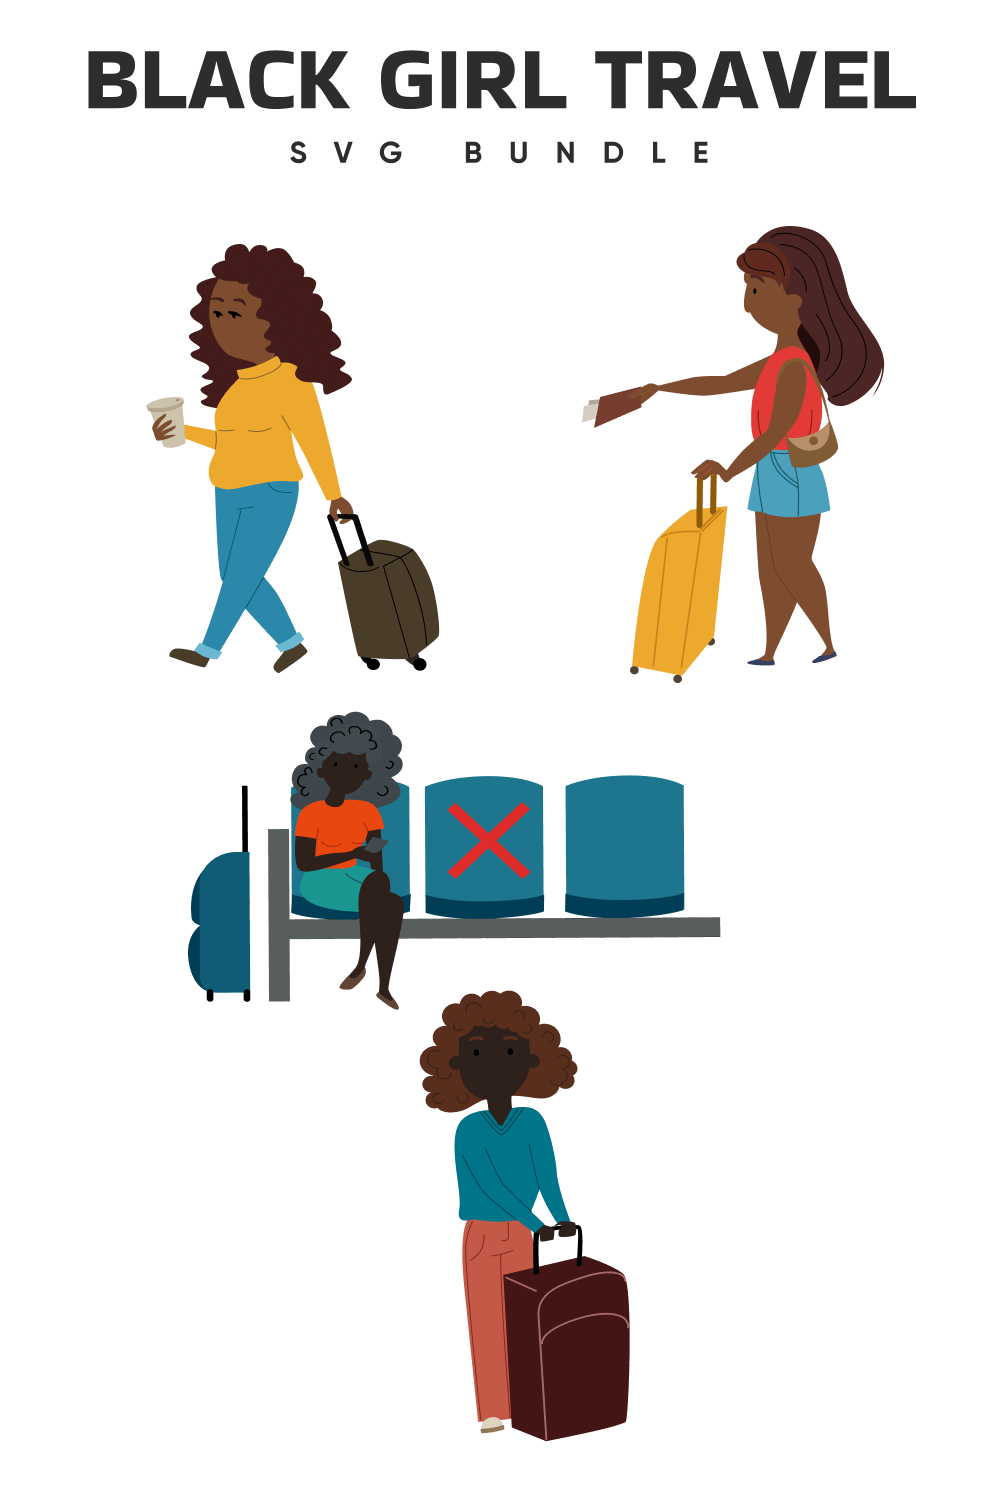 A black girl with a glass of coffee in her hands is preparing for a long journey.